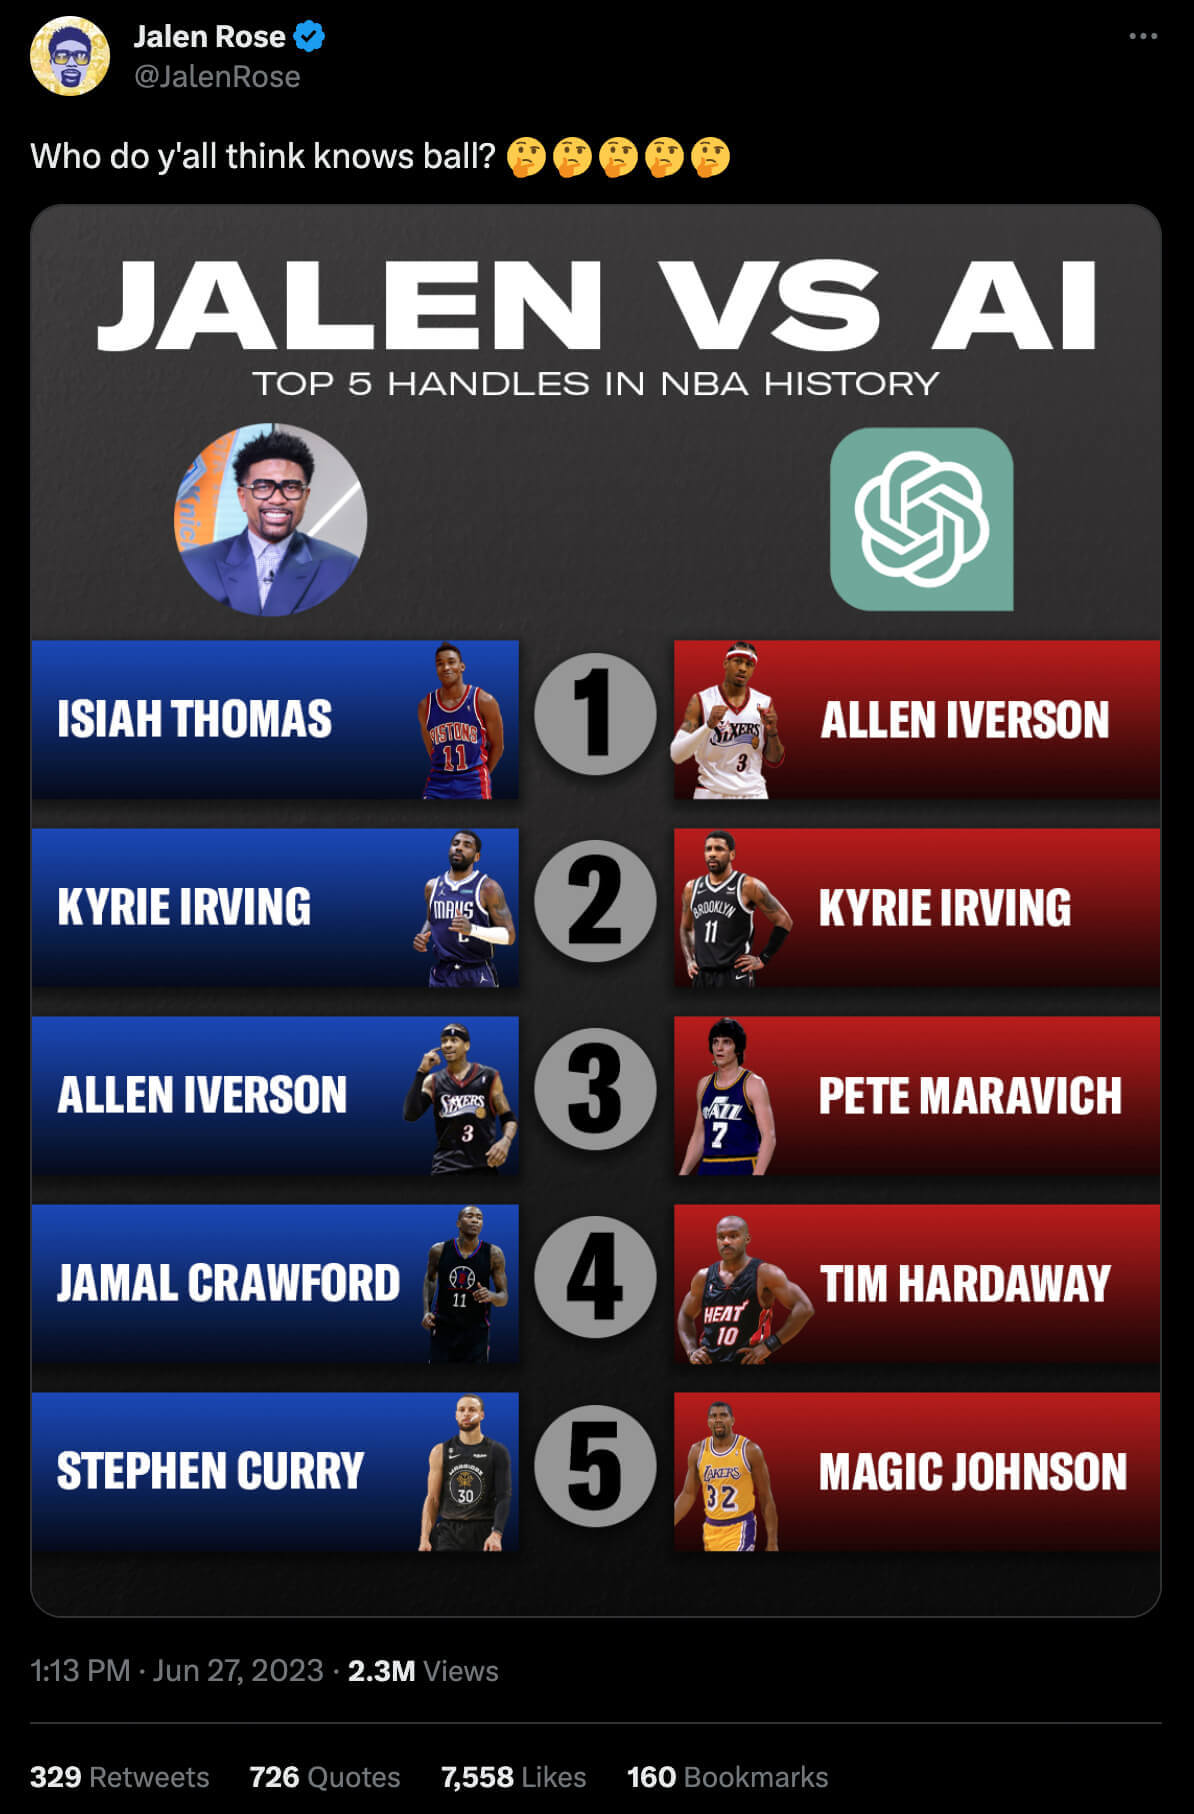 Jalen Rose sharing his picks for the top handles in NBA history